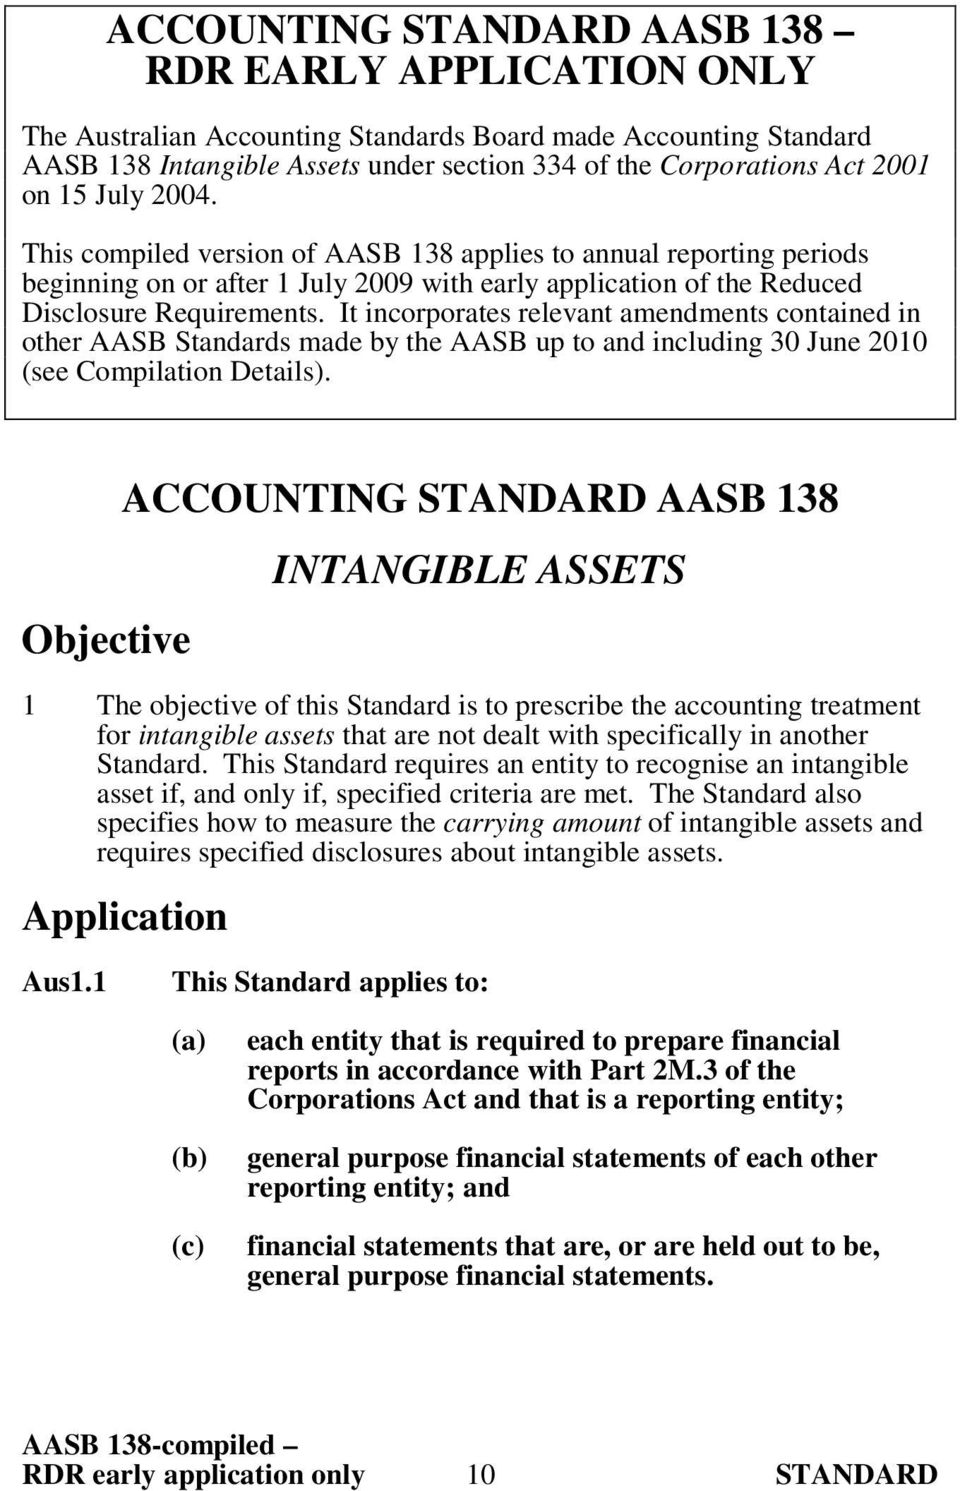 It incorporates relevant amendments contained in other AASB Standards made by the AASB up to and including 30 June 2010 (see Compilation Details).